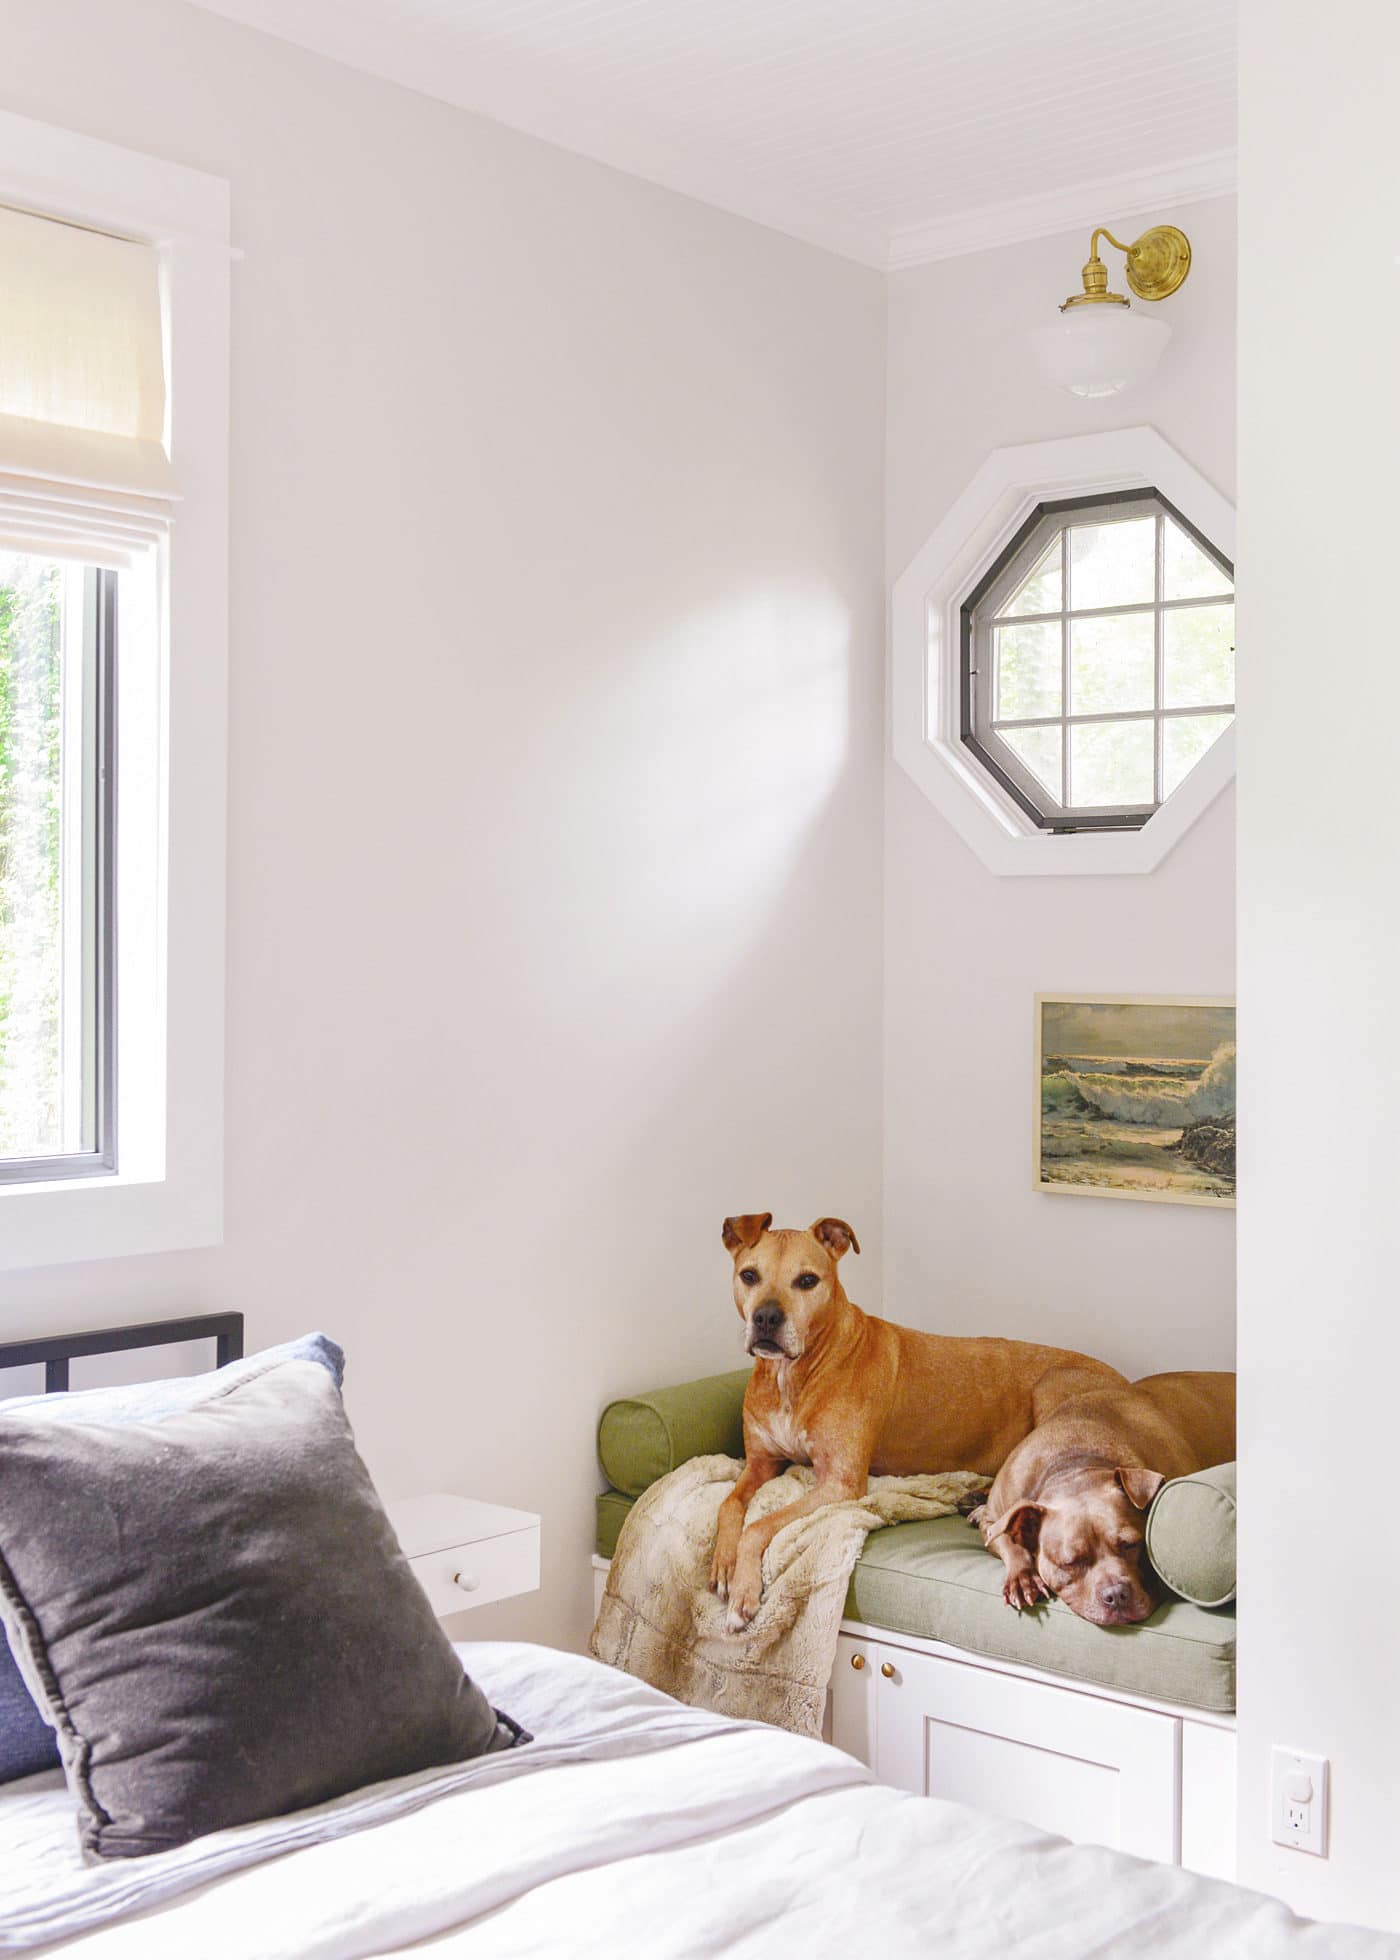 Window seat bench with storage (makes a great elevated dog bed!) | via Yellow Brick Home